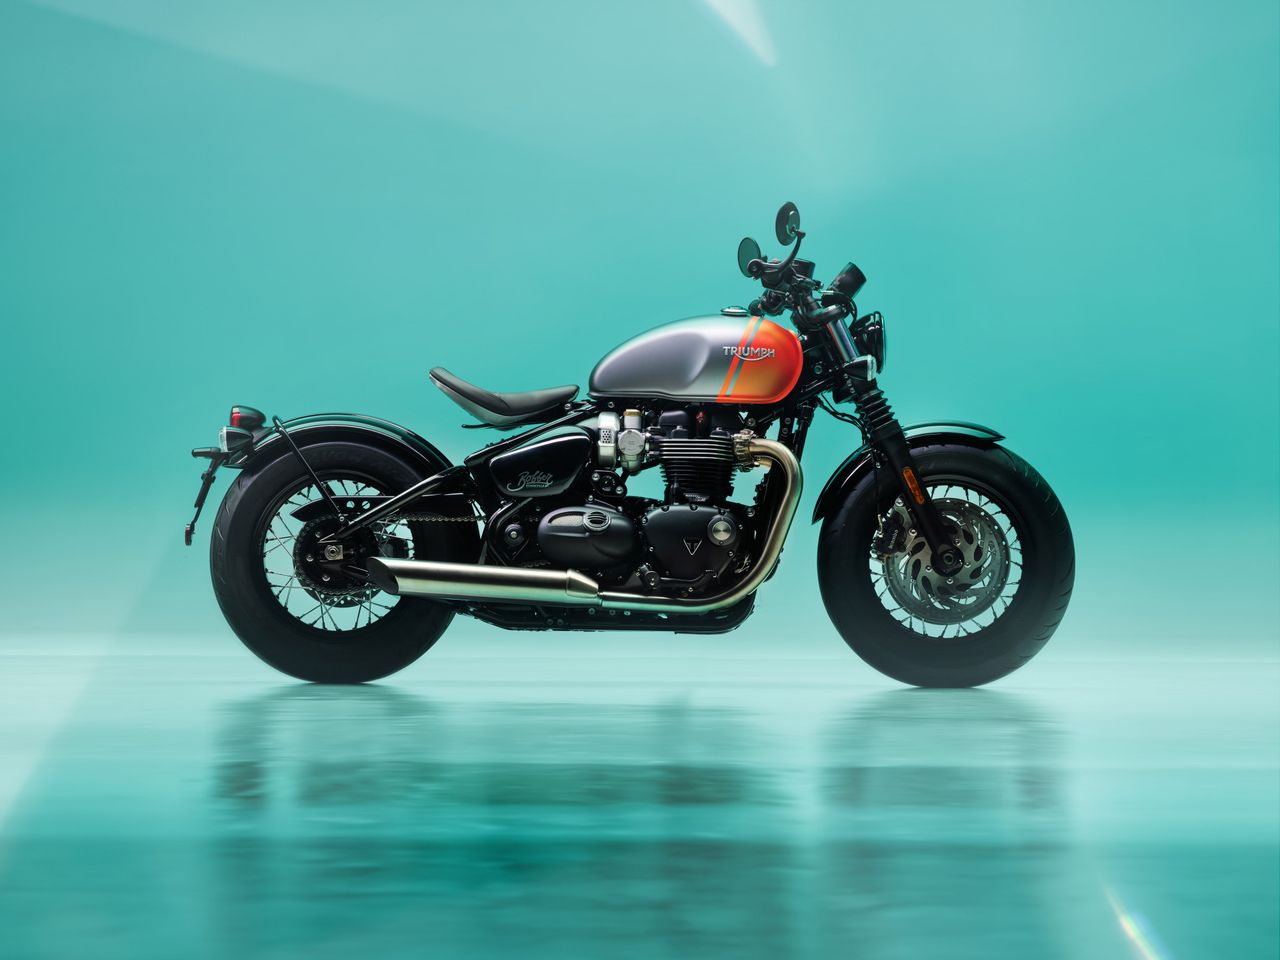 New paint options unveiled for Triumph motorcycles' 2025 lineup